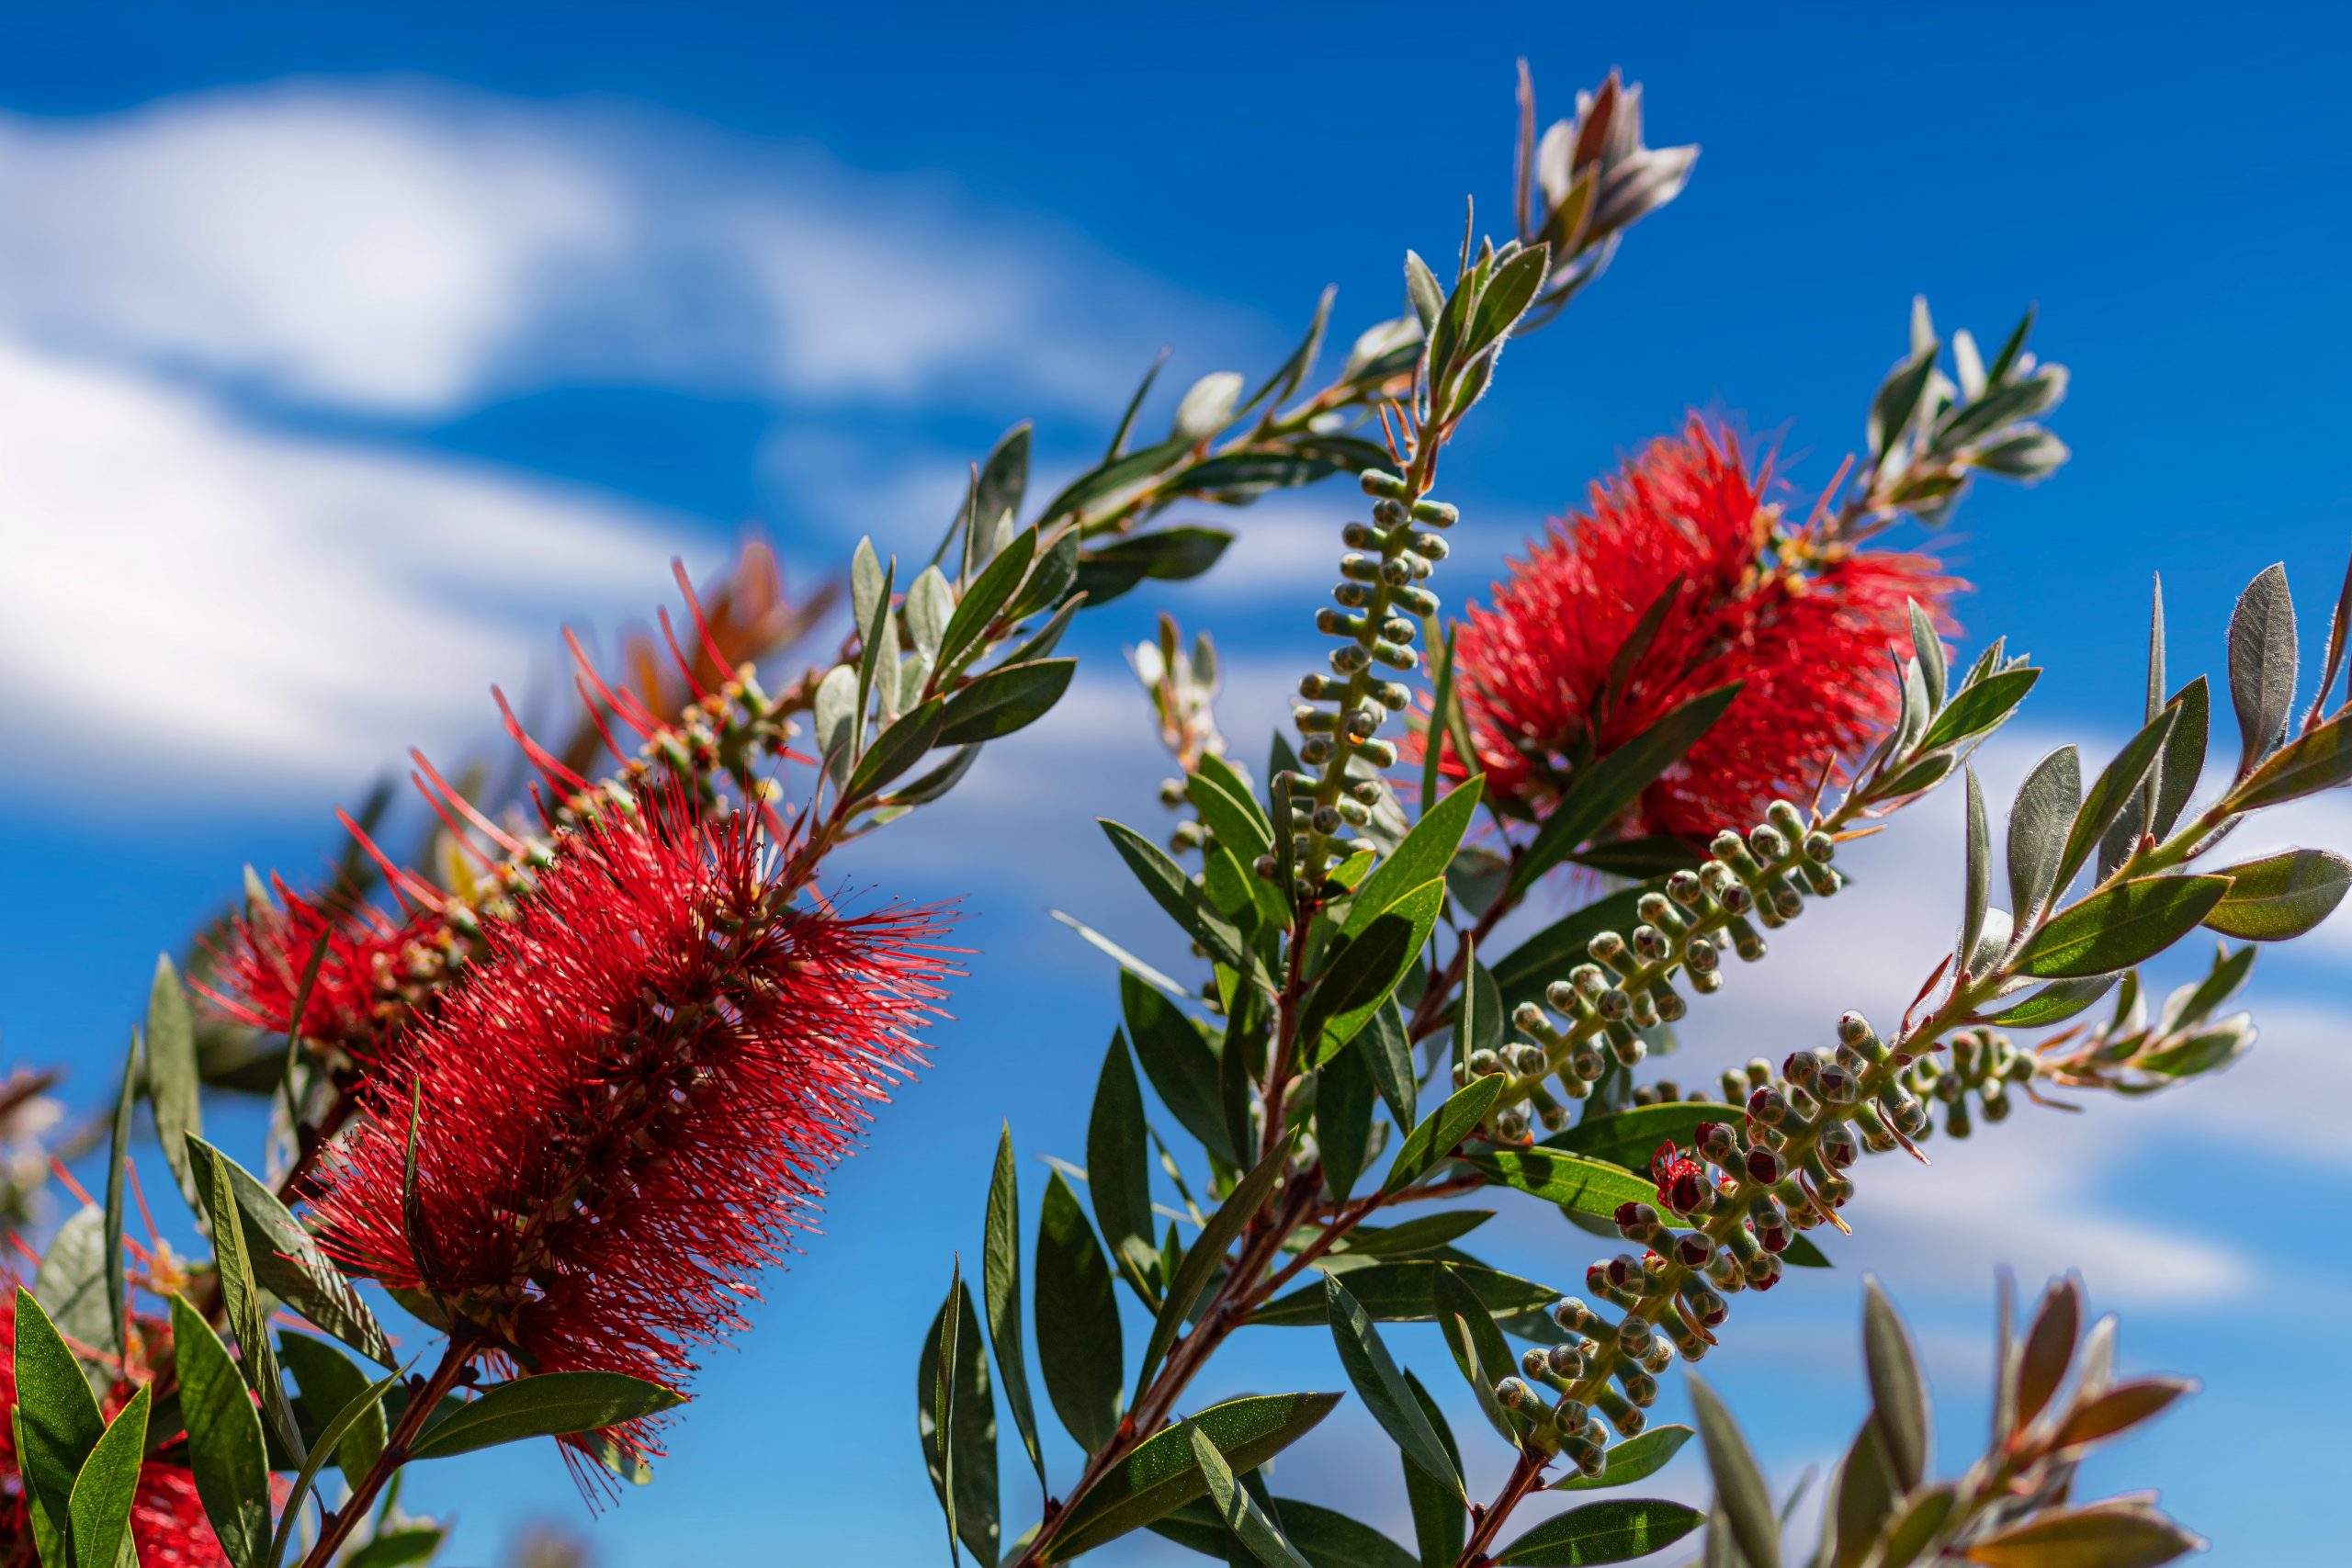 https://www.thearches.co.uk/wp-content/uploads/Caring-for-Callistemon-Splendens-Plant-Tips-Techniques-and-FAQ-scaled.jpg